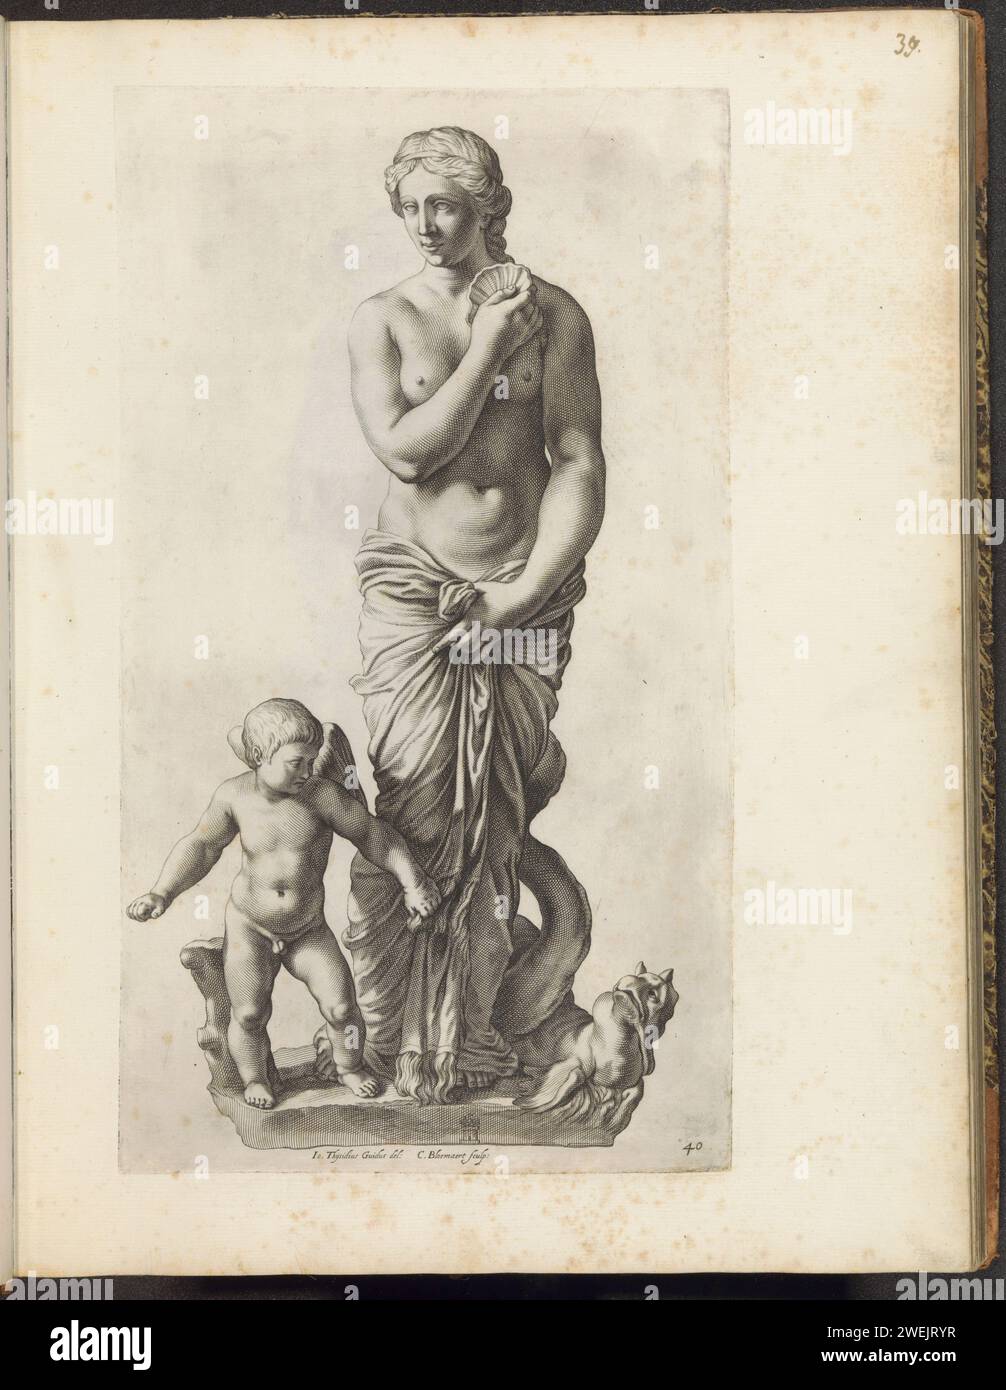 Statue of Venus with Amor, 1636 - 1647 print Image of Venus who holds a shell in her right hand. Amor pulls her rug to her right. On the left at her feet a sea monster. On the base the coat of arms of Vincenzo Giustiniani. Print is part of an album with a series of prints to the sculptures in the collection in the Galleria Giustiniani in Rome.  paper engraving (story of) Venus (Aphrodite). Venus and Cupid (Cupid not being mere attribute). piece of sculpture, reproduction of a piece of sculpture Stock Photo